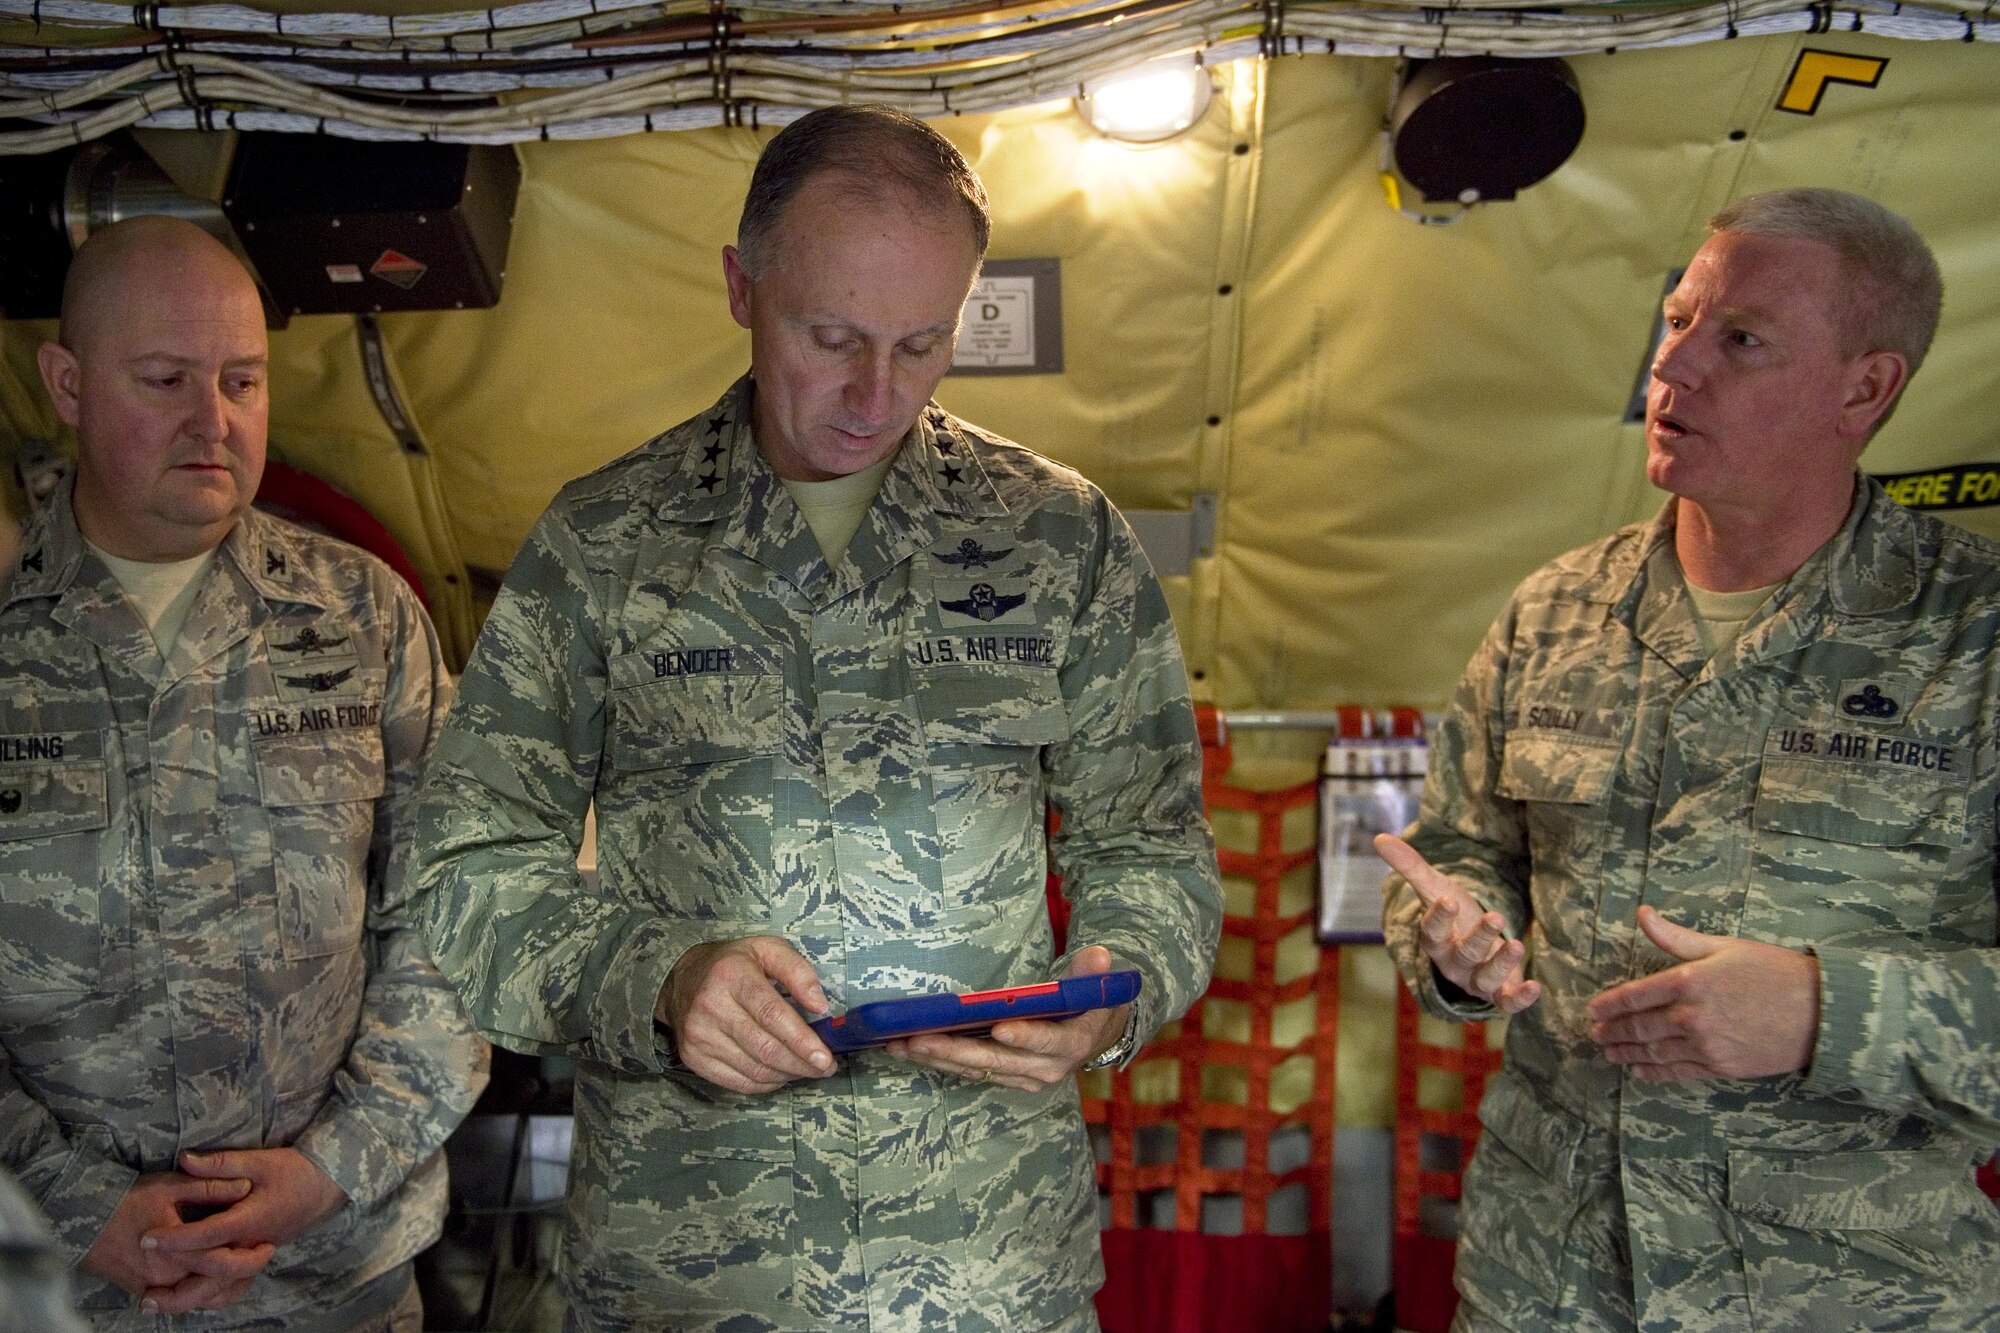 Lt. Gen. Bill Bender, Air Force chief of information dominance and chief information officer, uses an electronic notepad to display technical orders as Chief Master Sgt. Richard Scully, 434th Maintenance Group chief of quality assurance, explains their capabilities during his visit to Grissom Air Reserve Base, Ind., Jan. 14, 2016. The 434th ARW was recently selected as one of two lead pilot squadrons in the Air Force Reserve Command to transition into a next generation communications squadron. (U.S. Air Force photo/Tech. Sgt. Benjamin Mota)